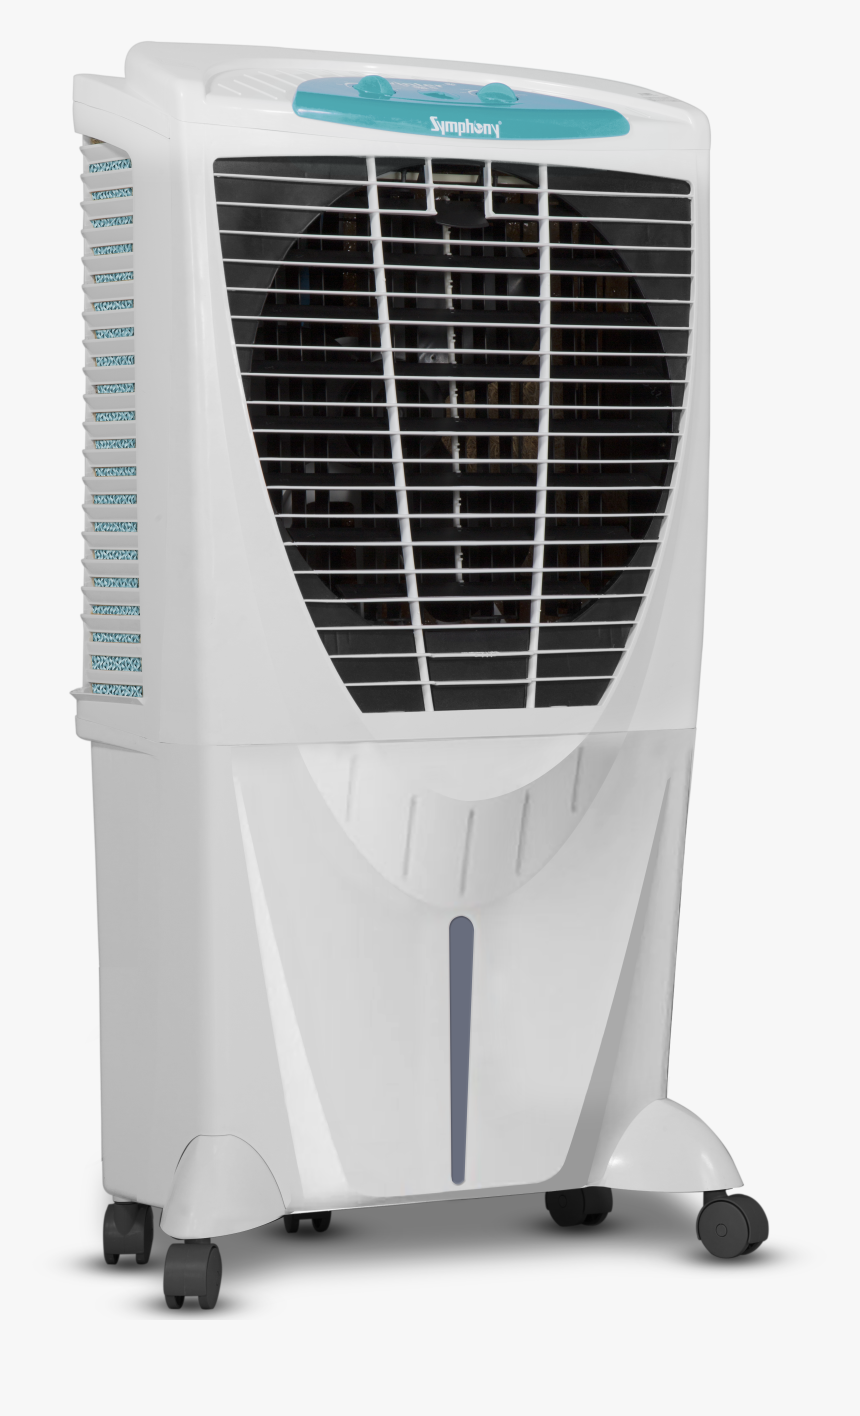 Winter 80 Xl - Symphony Cooler, HD Png Download, Free Download